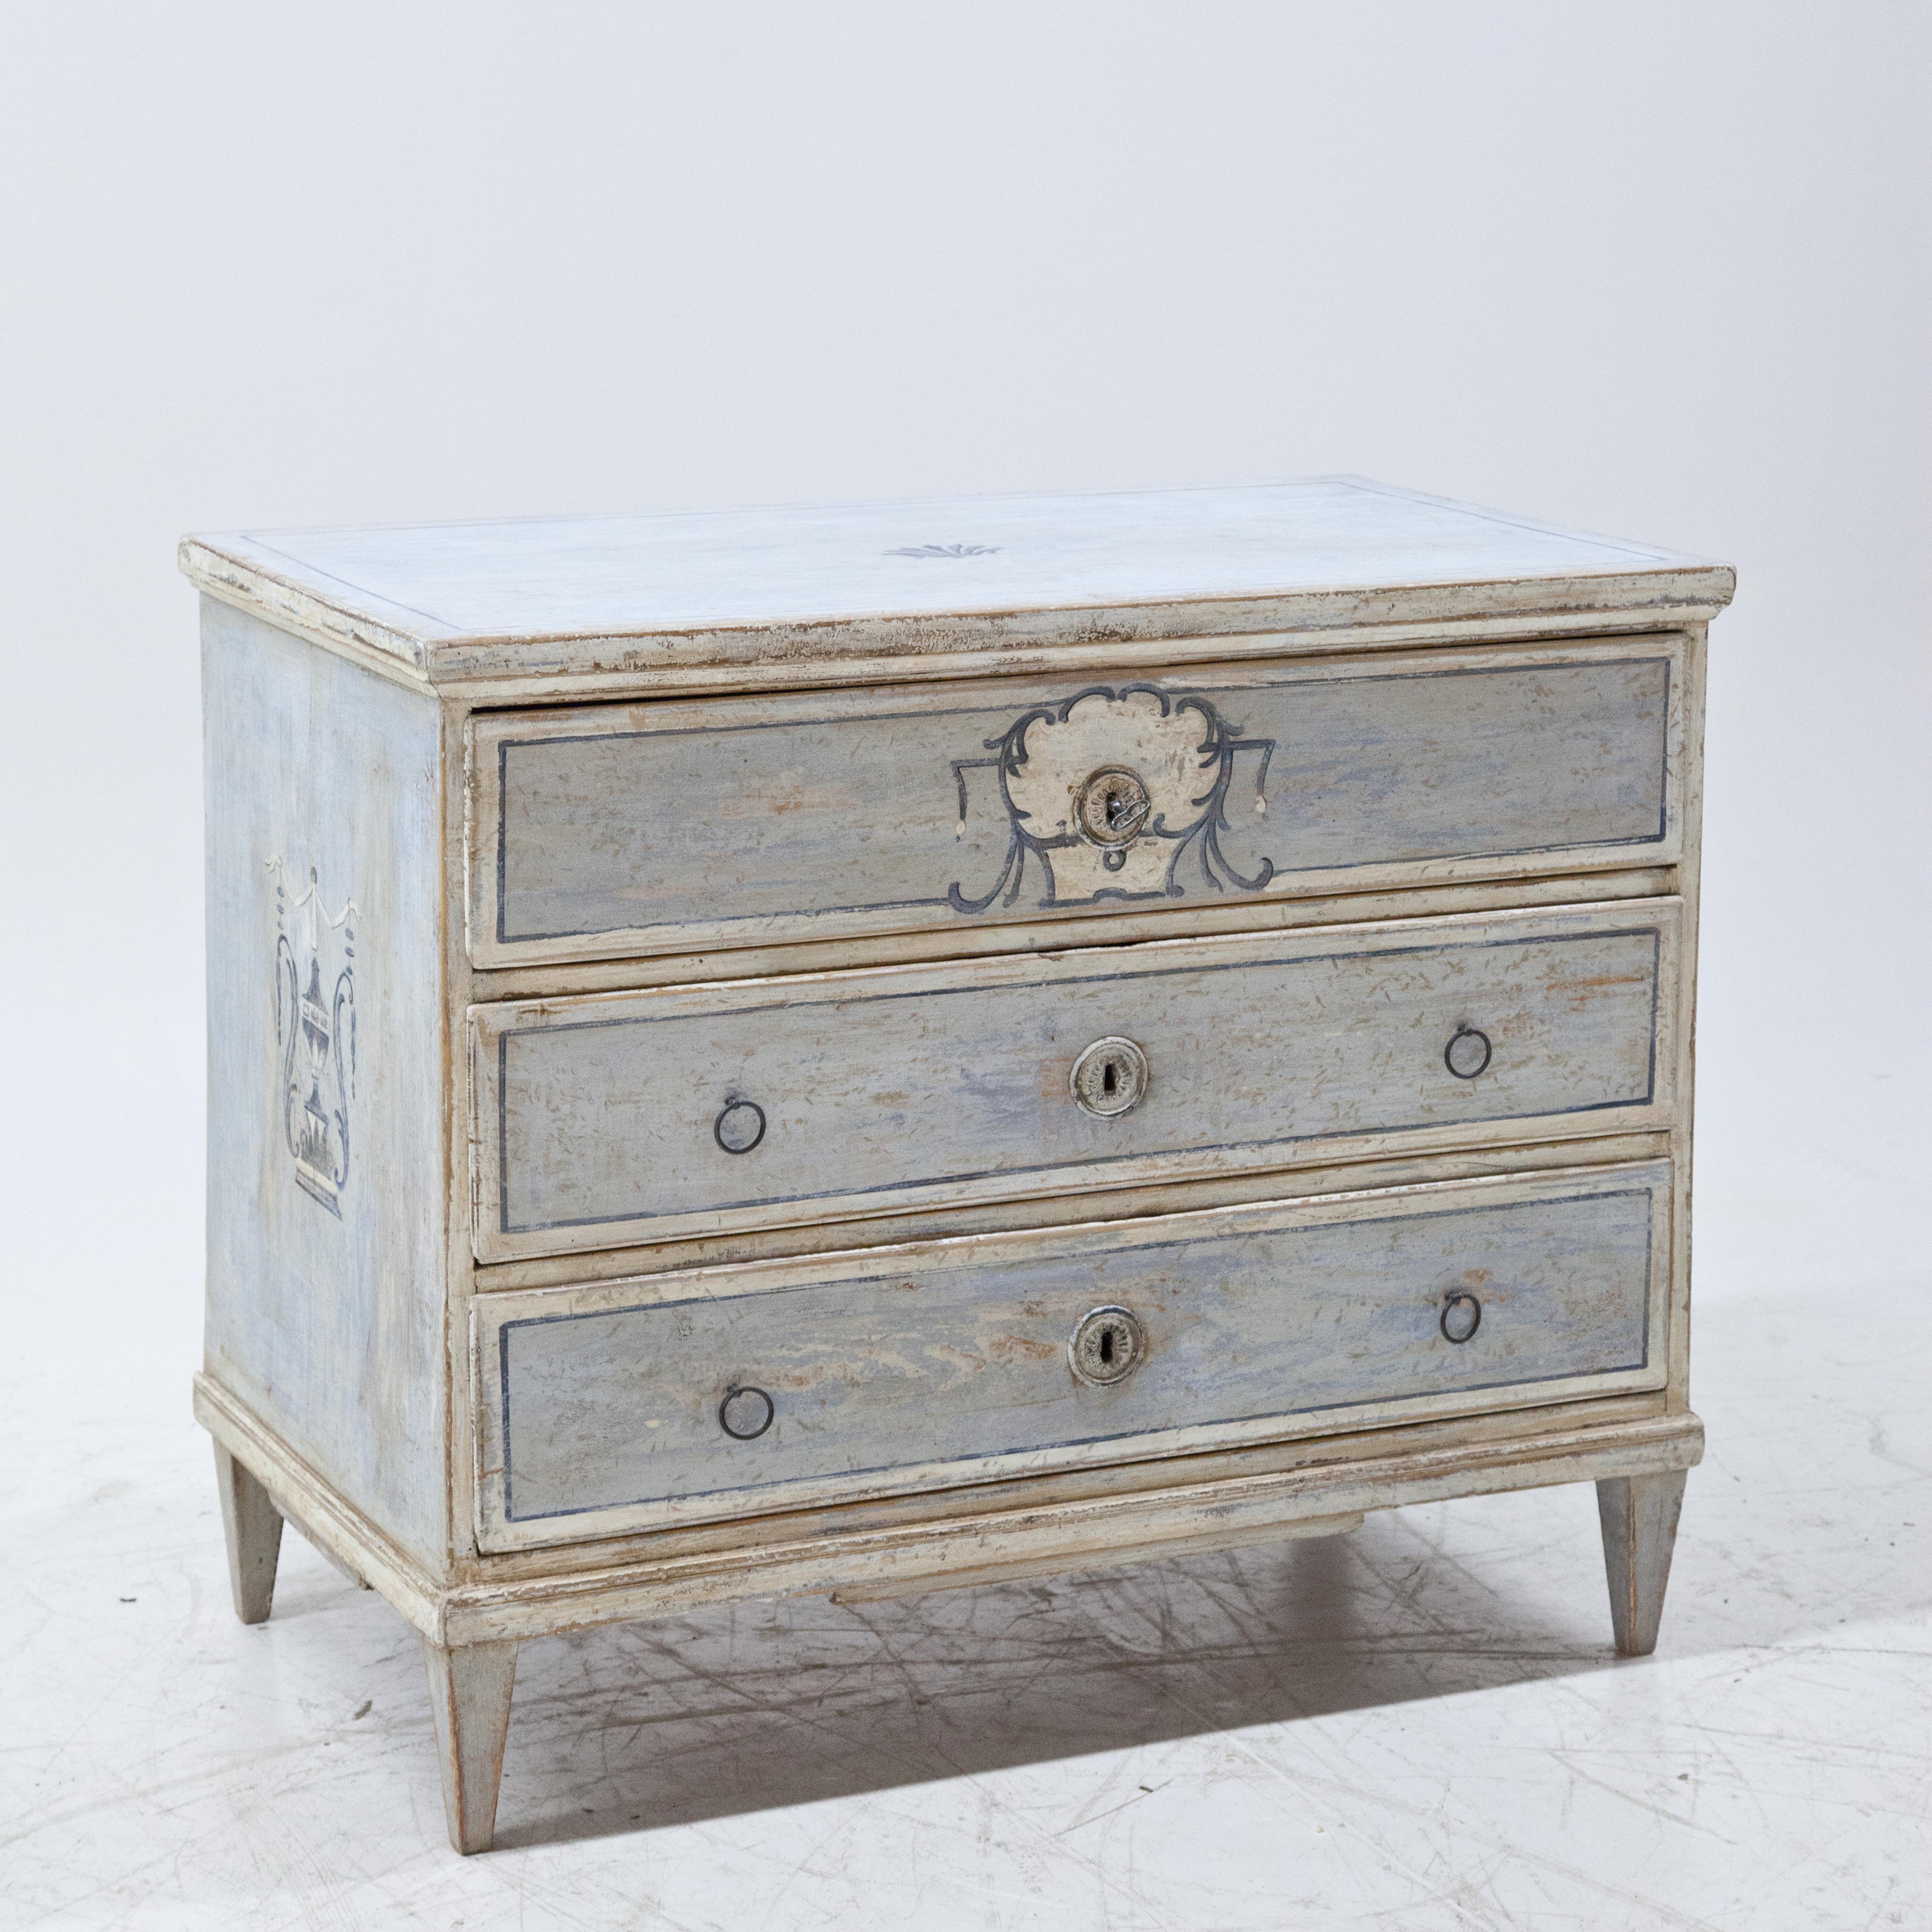 Biedermeier chest of drawers with three drawers on square pointed feet with a new, light blue paint with dark blue accents and a distressed patina.